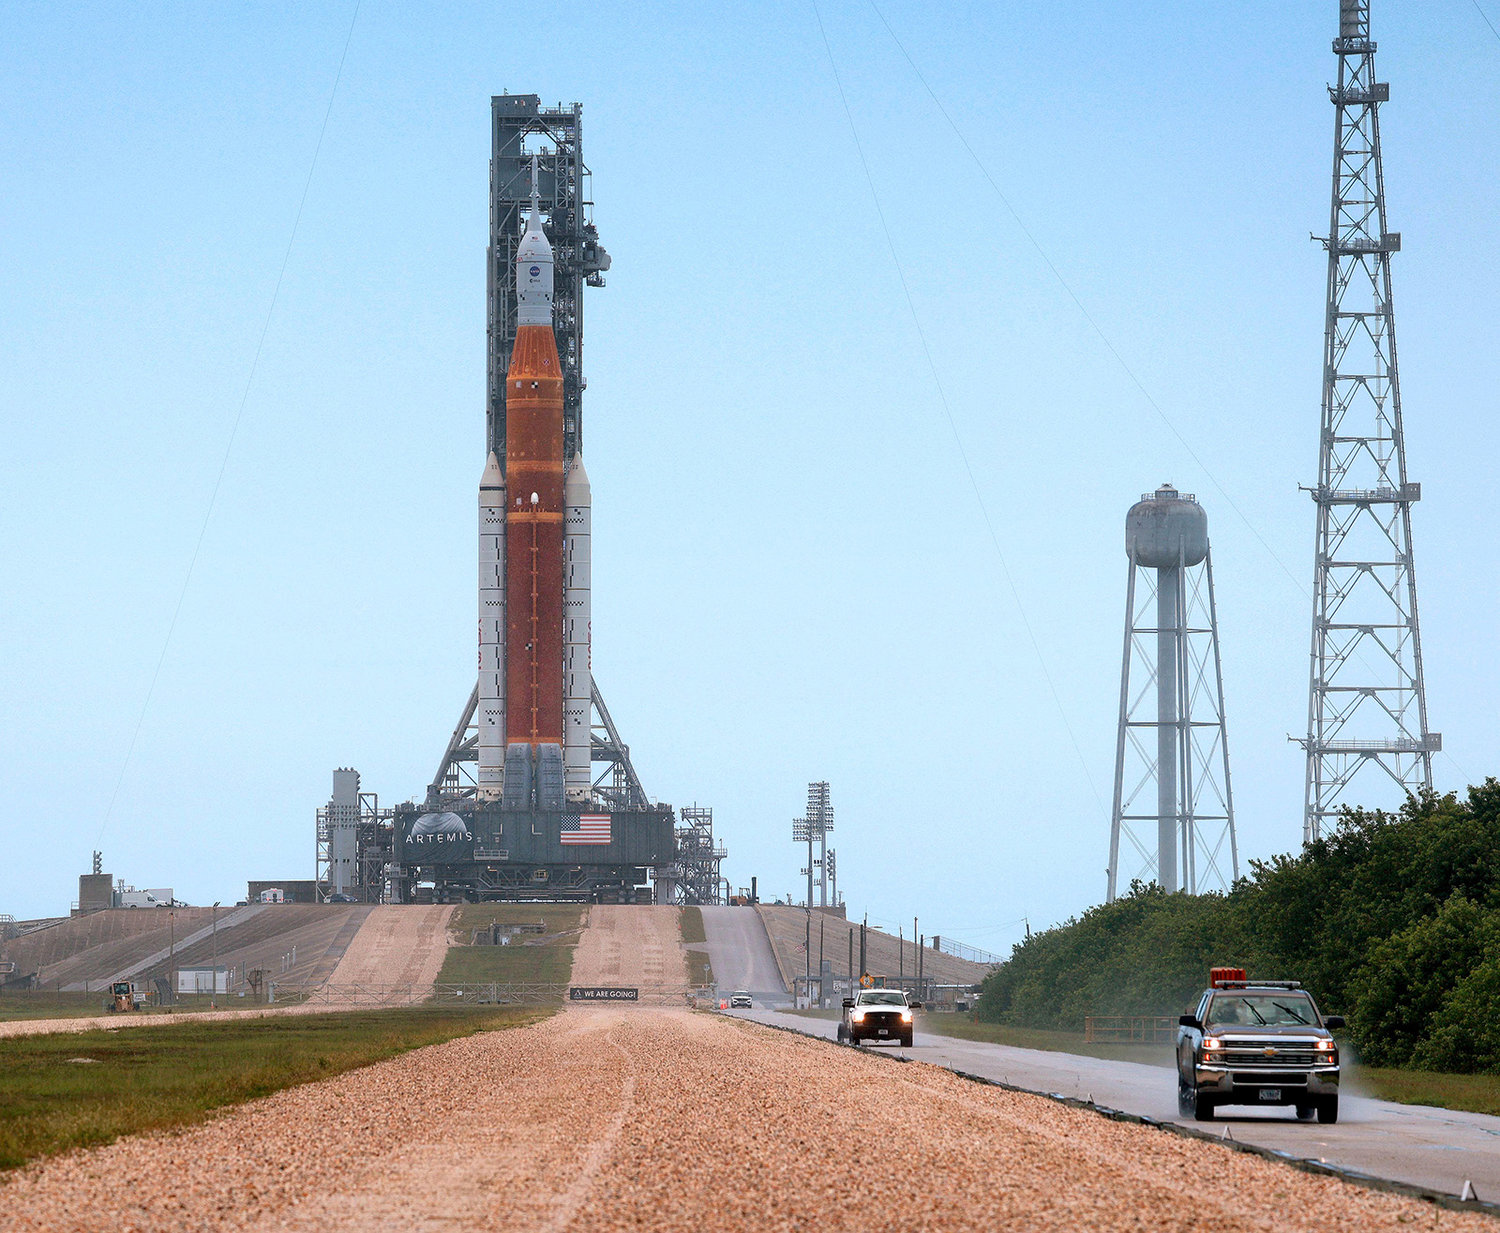 After completing its second rollout overnight Sunday, Artemis 1 —the NASA moonshot rocket— stands at launch pad 39-B at Kennedy Space Center, Florida, Monday, June 6, 2022. (Joe Burbank/Orlando Sentinel/TNS)